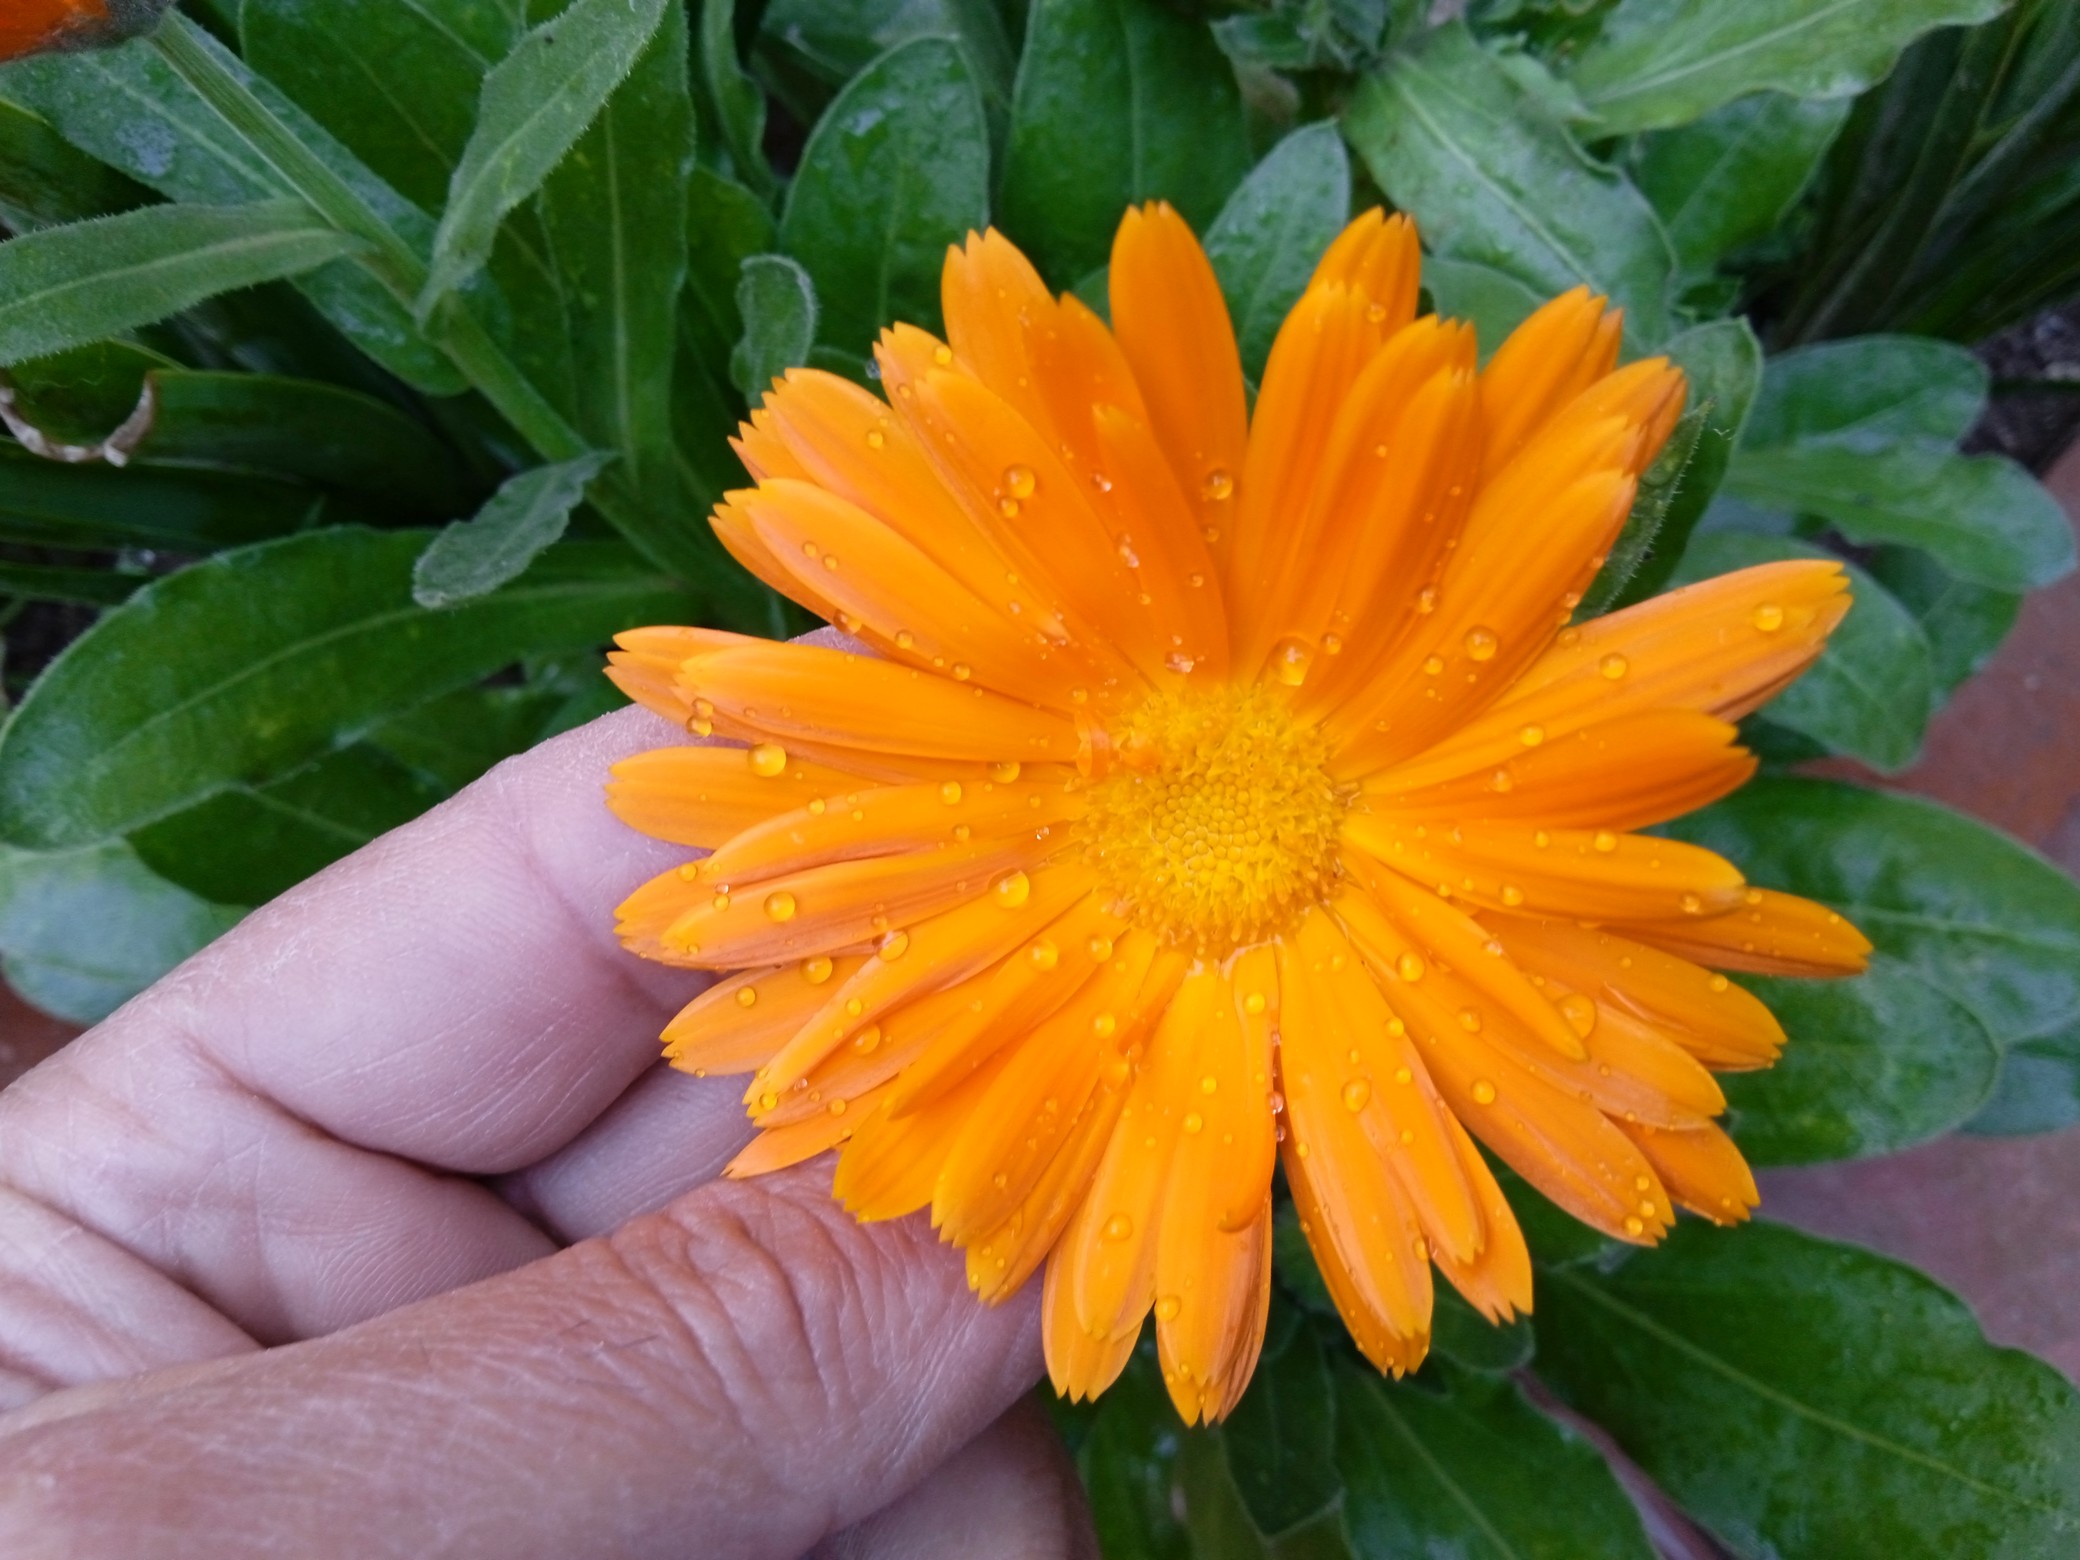 Calendula bloom constantly throughout the growing season, provides a spectacular display of light yellow to deep orange blooms from early summer until frost.